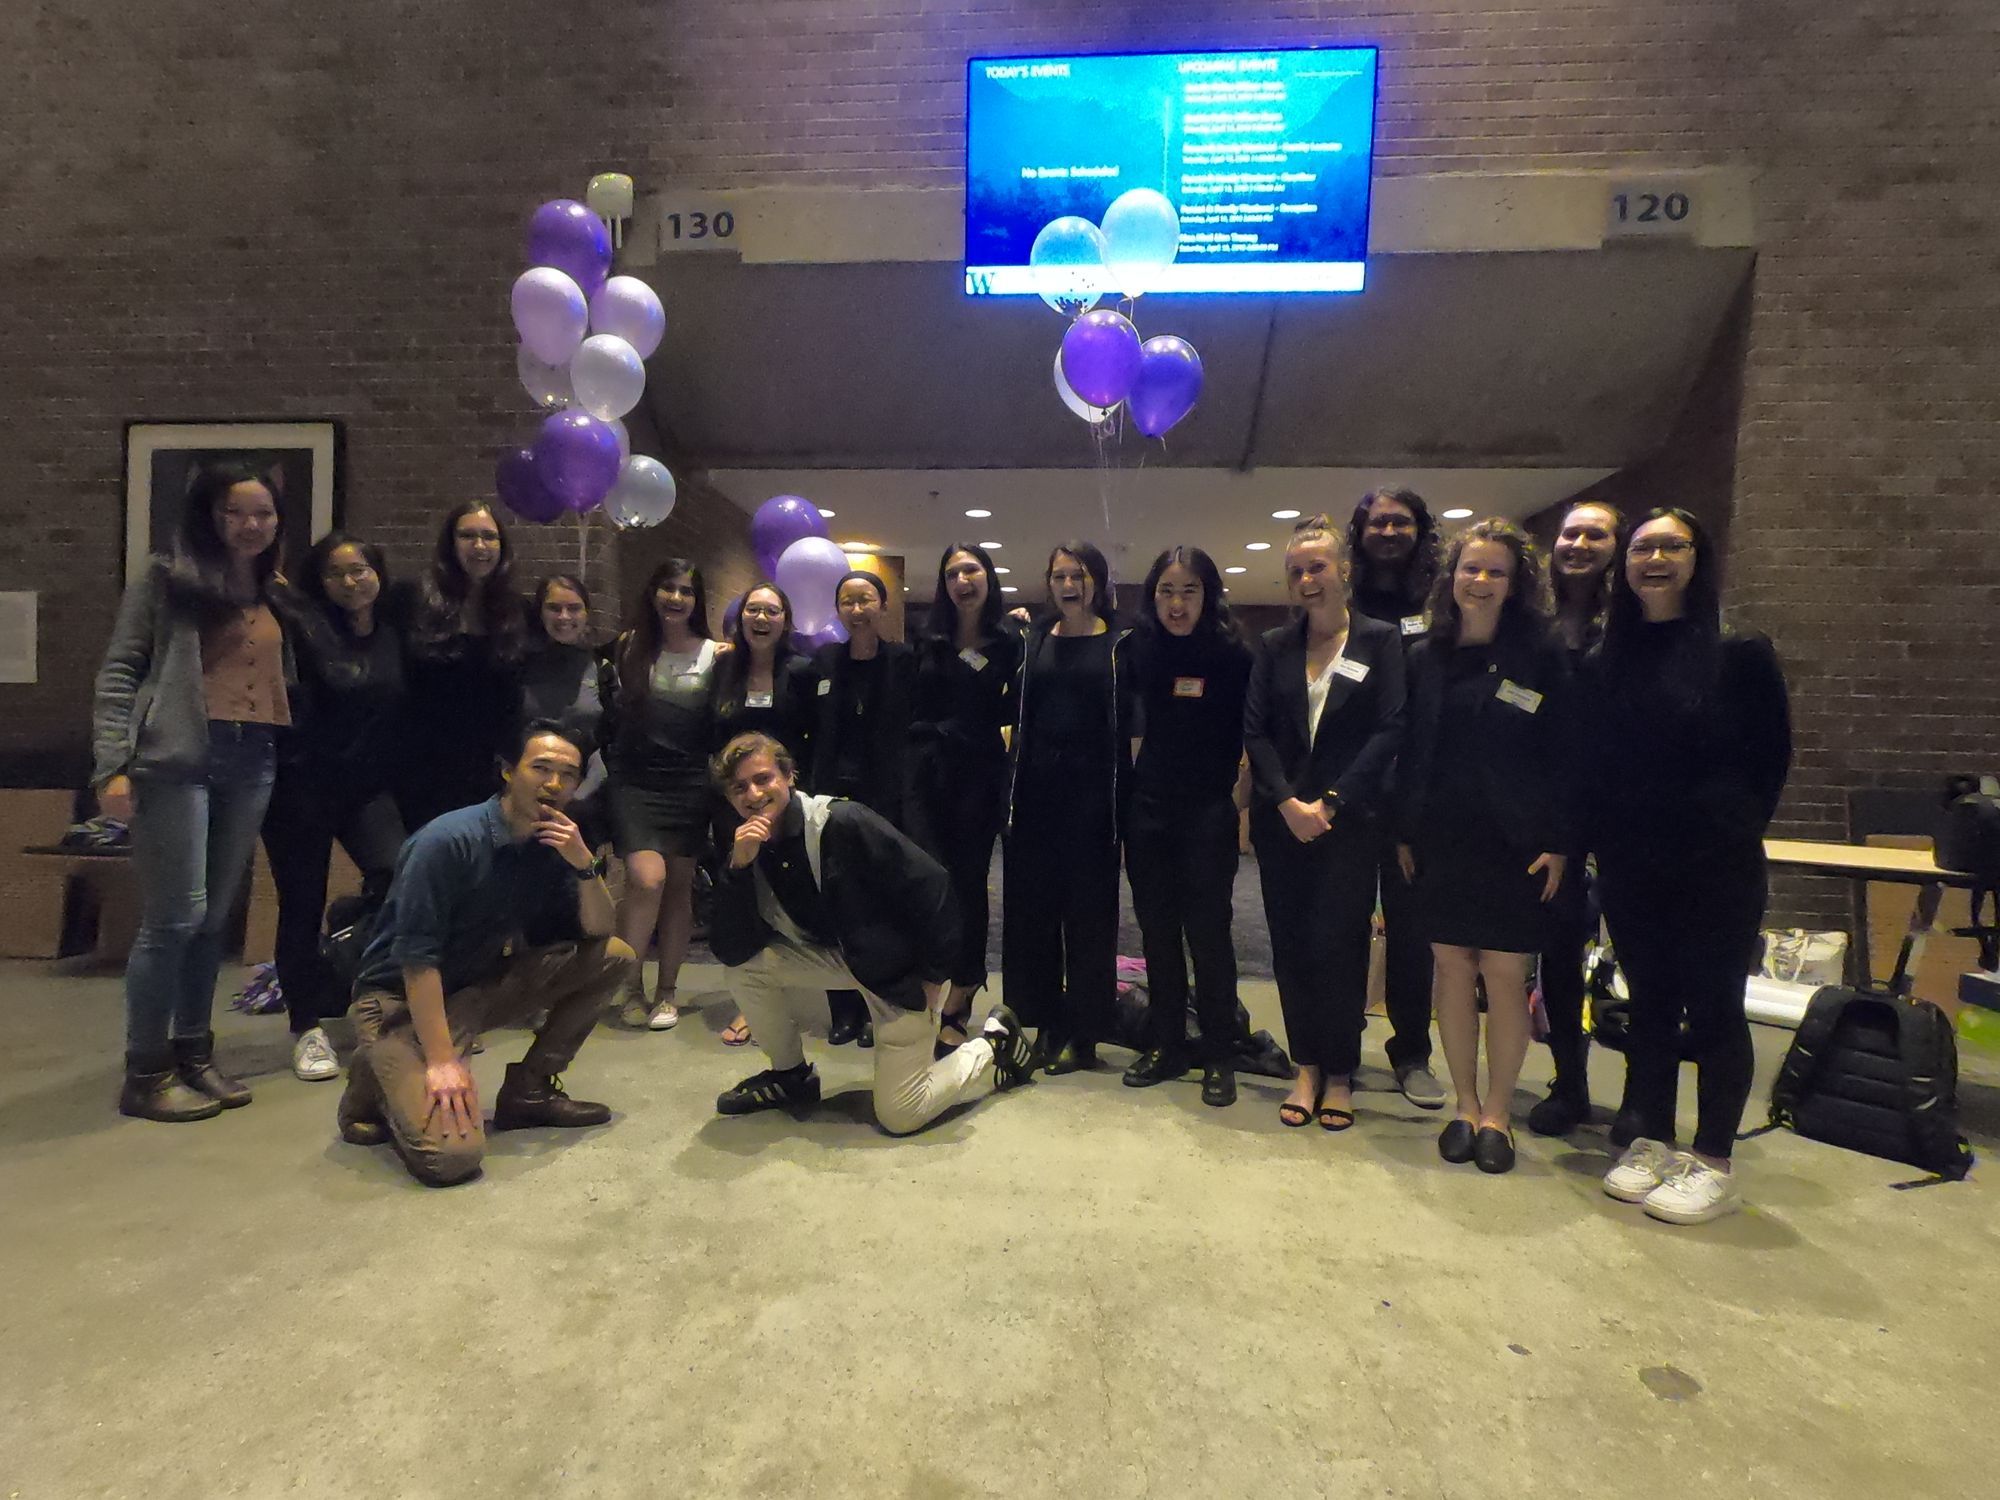 In bottom left image, the EWN planning committee smiles, arranged for a group photo in the lobby of Kane Hall outside the doors of the auditorium, with purple and white balloons in the background.